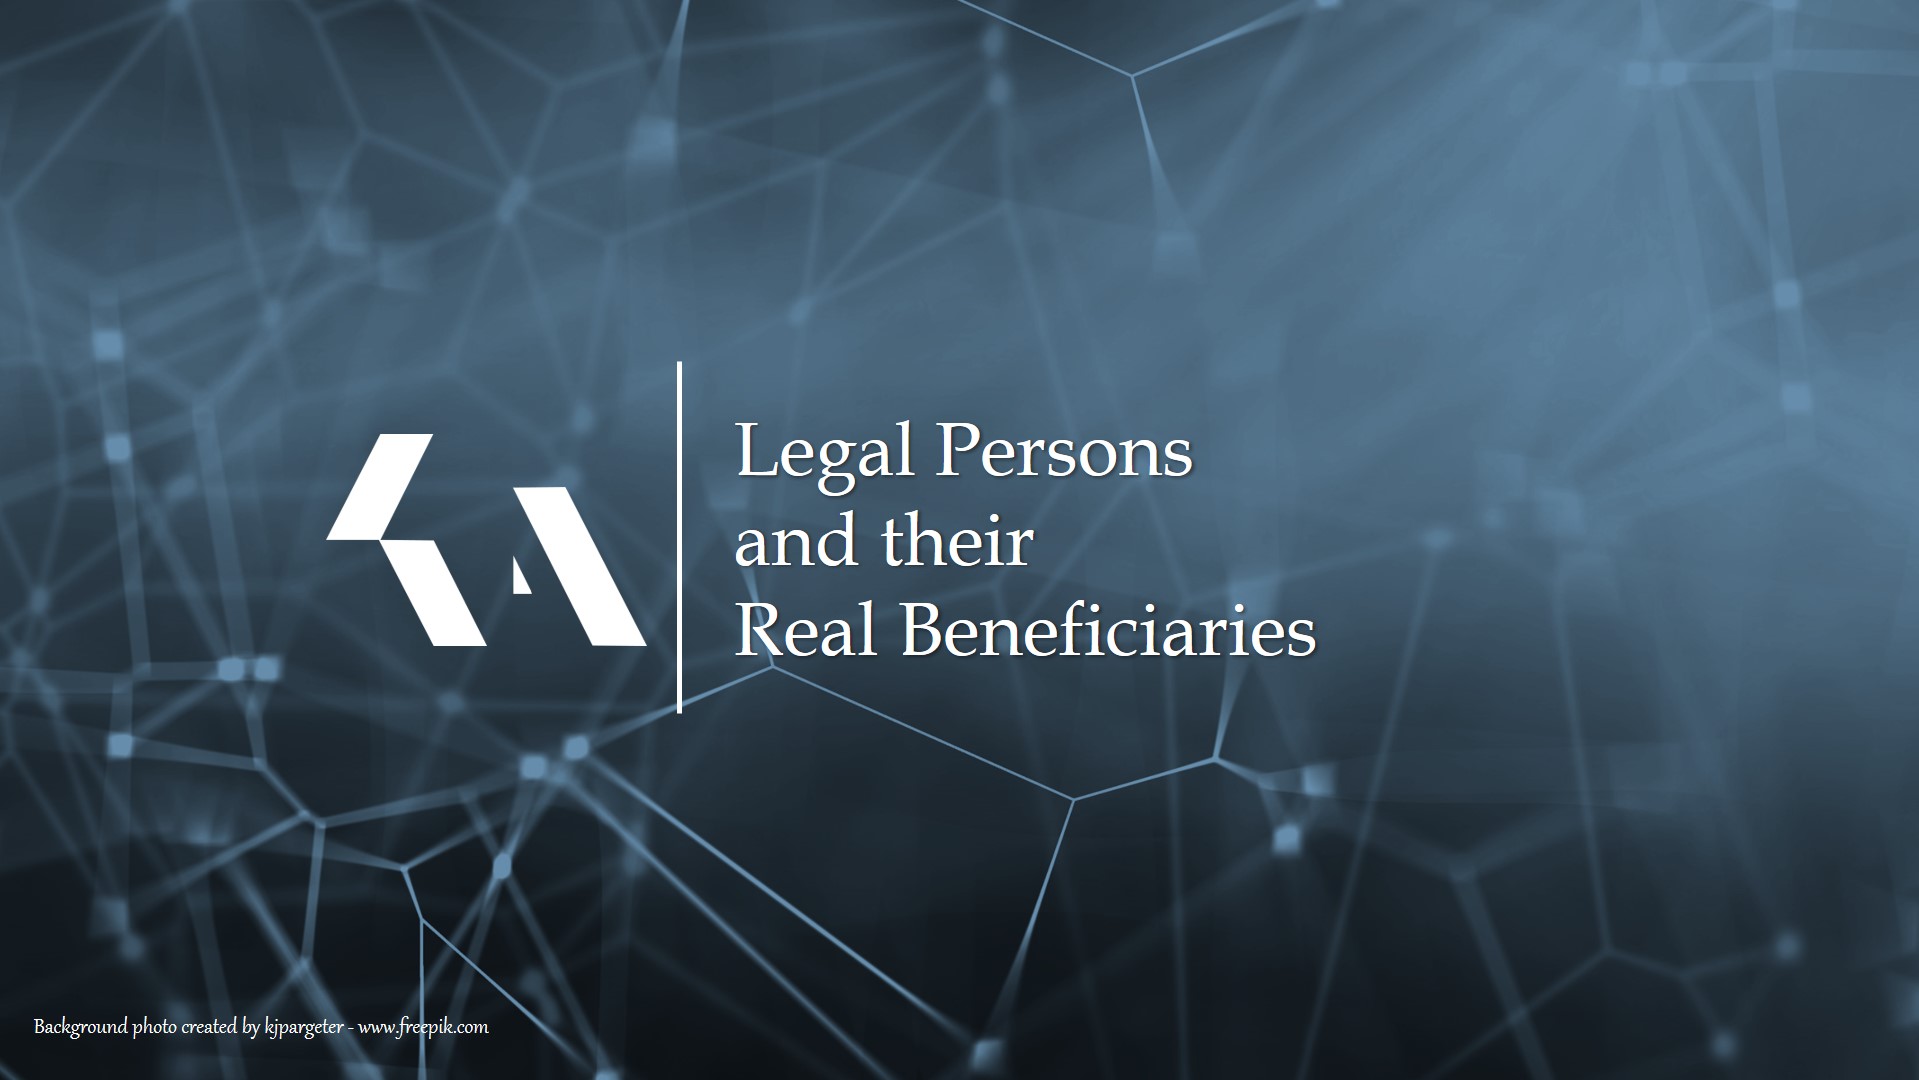 Legal Persons and their Real Beneficiaries